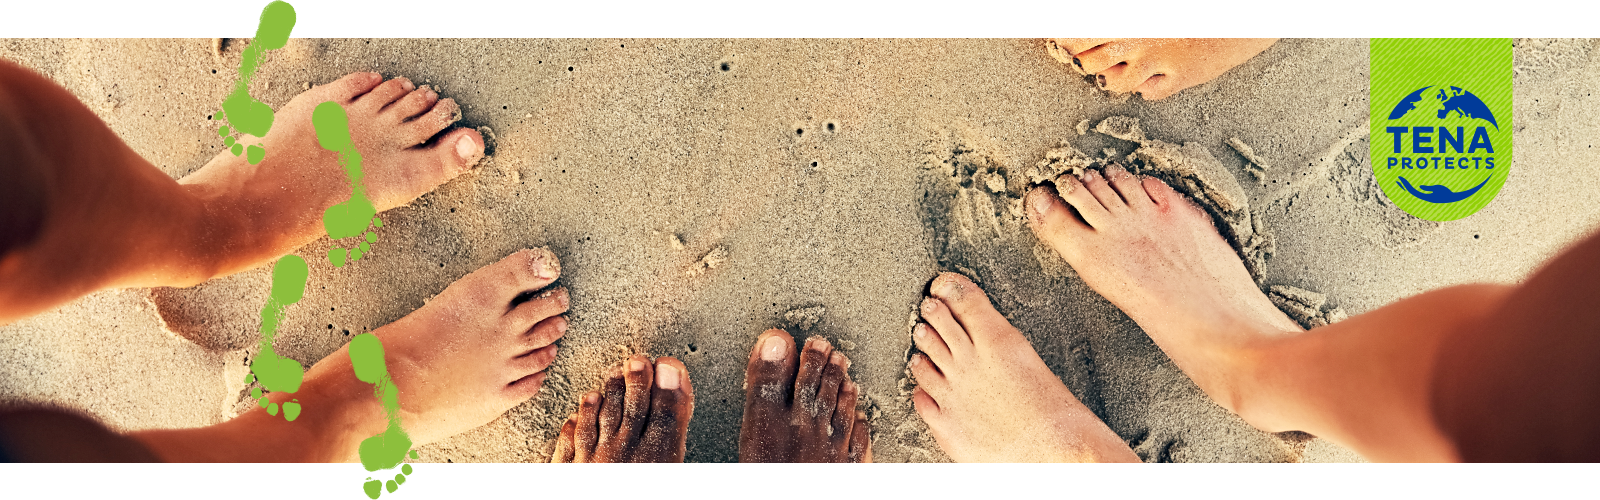 Close up of bare feet in the sand shown together with a cartoon image of green footprints and the TENA protects logo